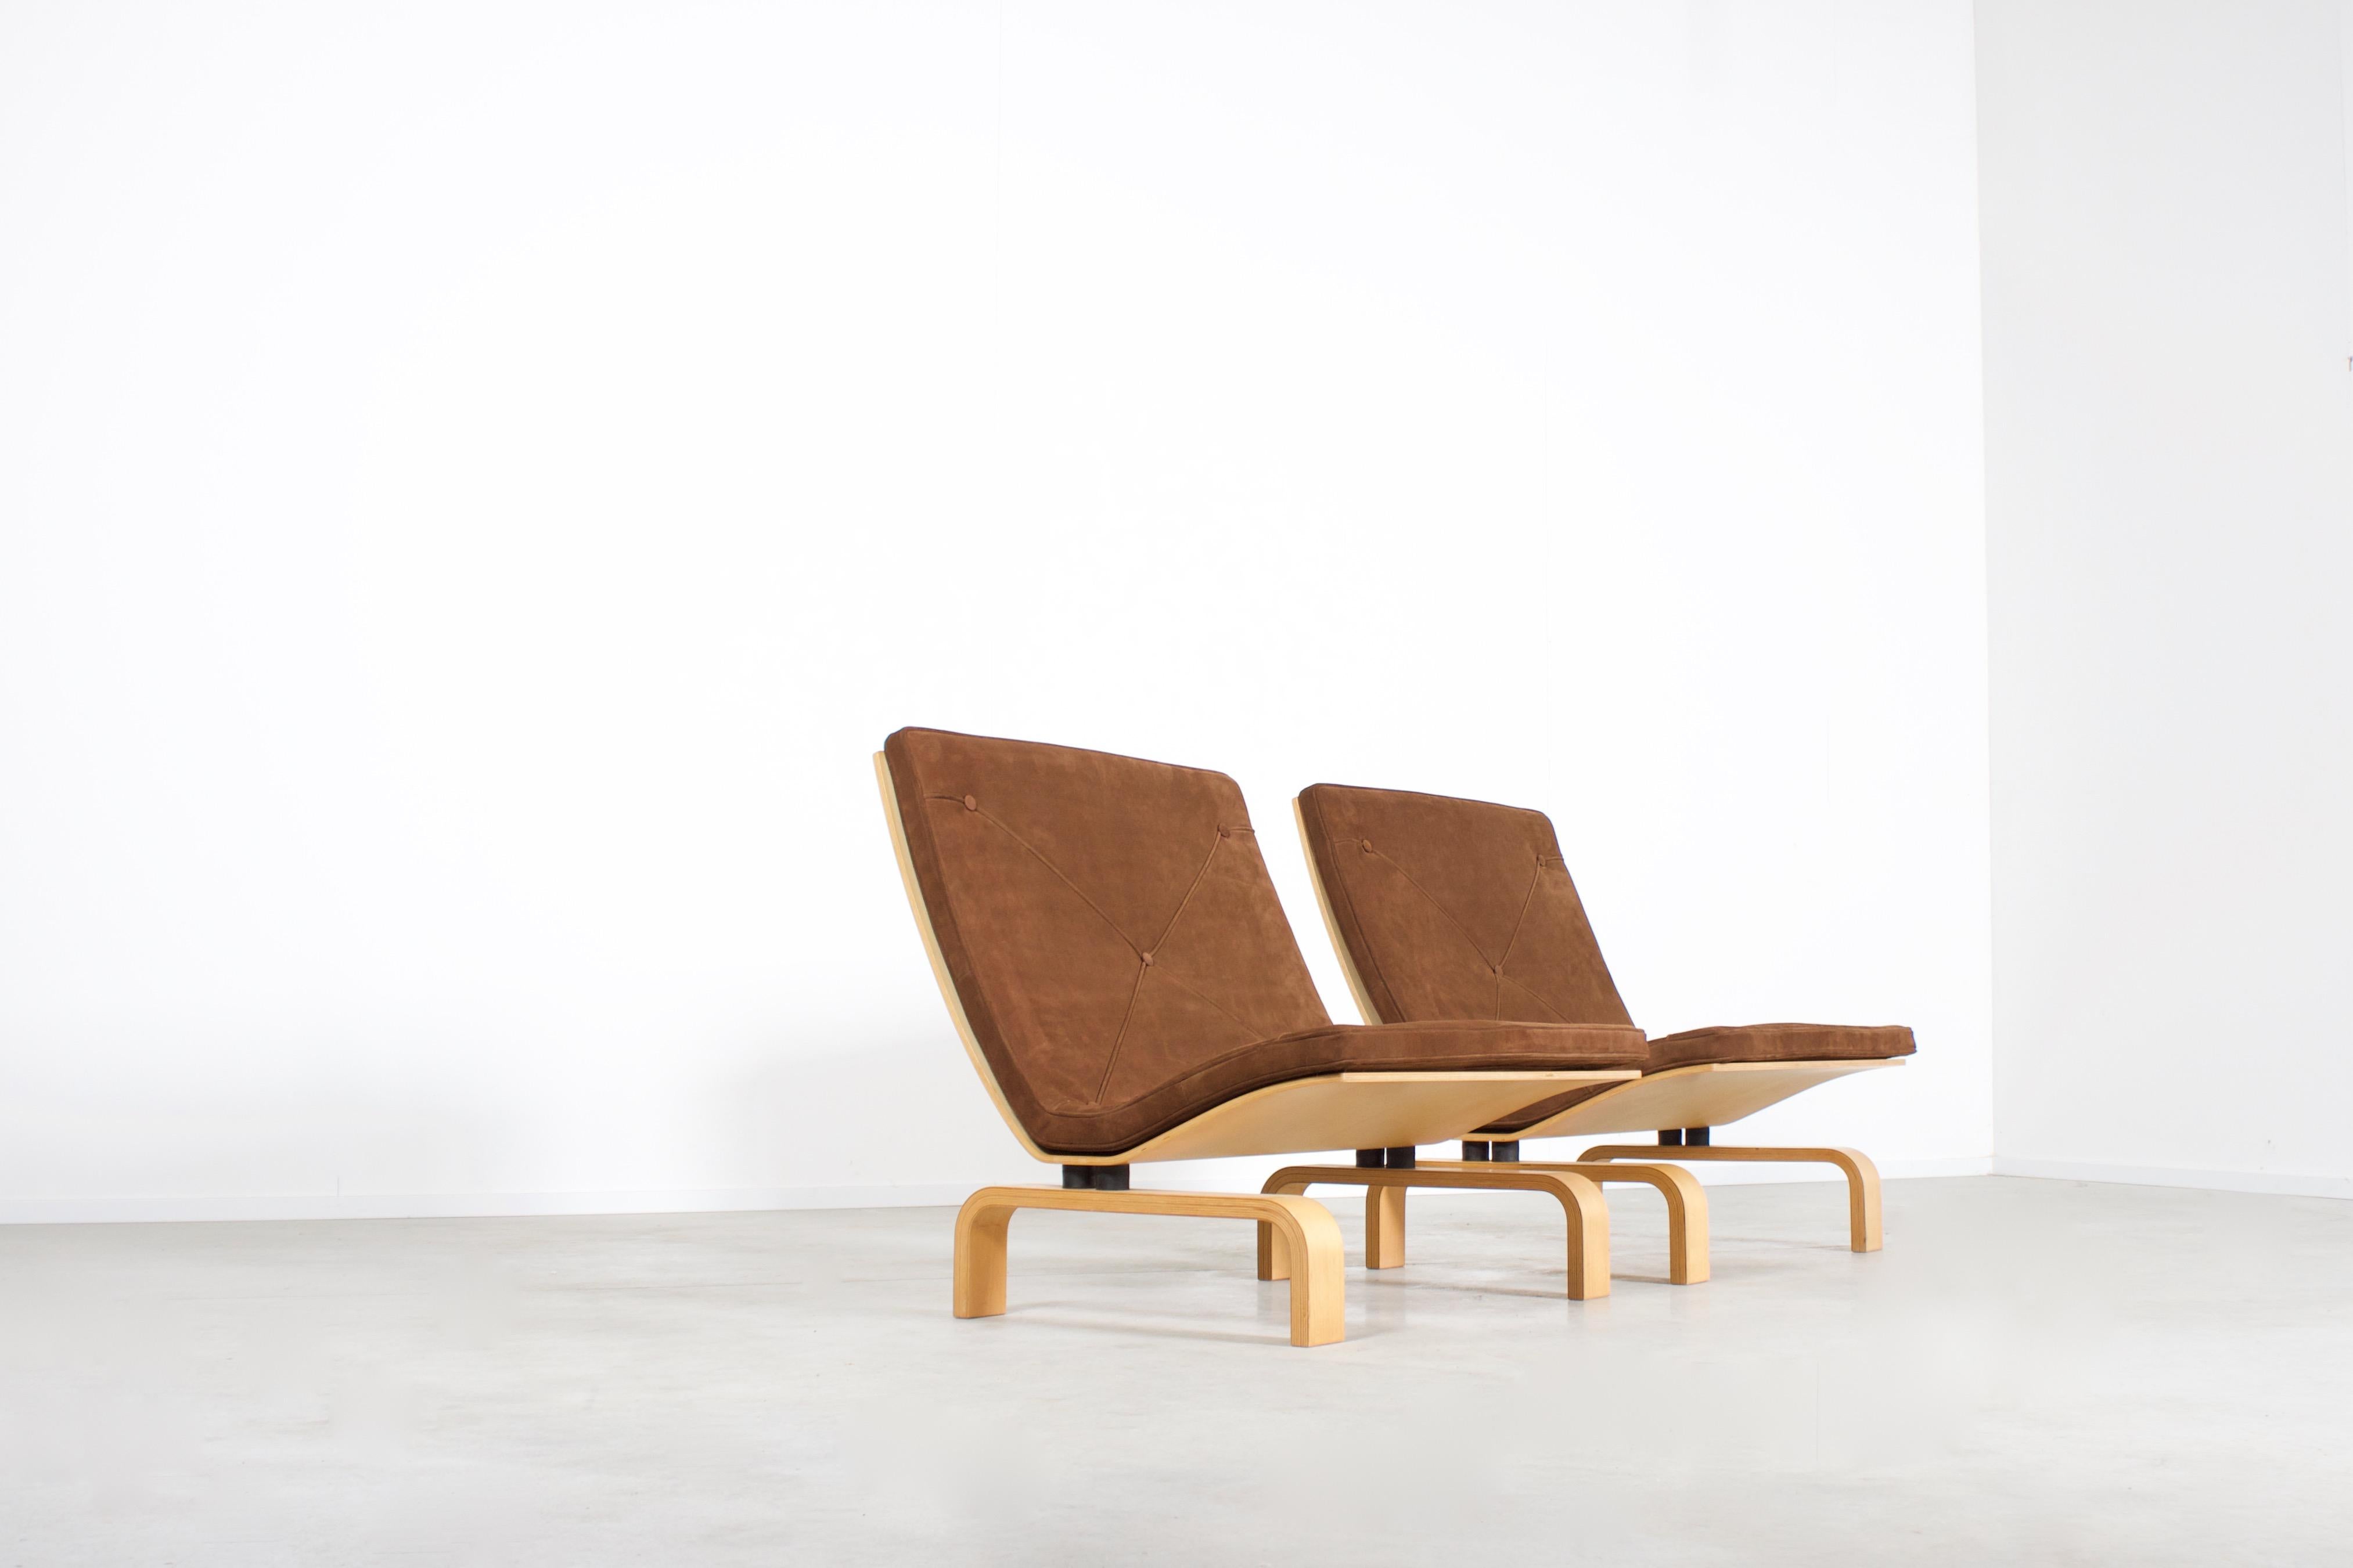 Set of impressive PK27 easy chairs in excellent condition.

Designed by Poul Kjaerholm, Denmark

Manufactured by E. Kold Christensen

These chairs were only produced for three years, between 1971 and 1974

They are constructed of a bent plywood